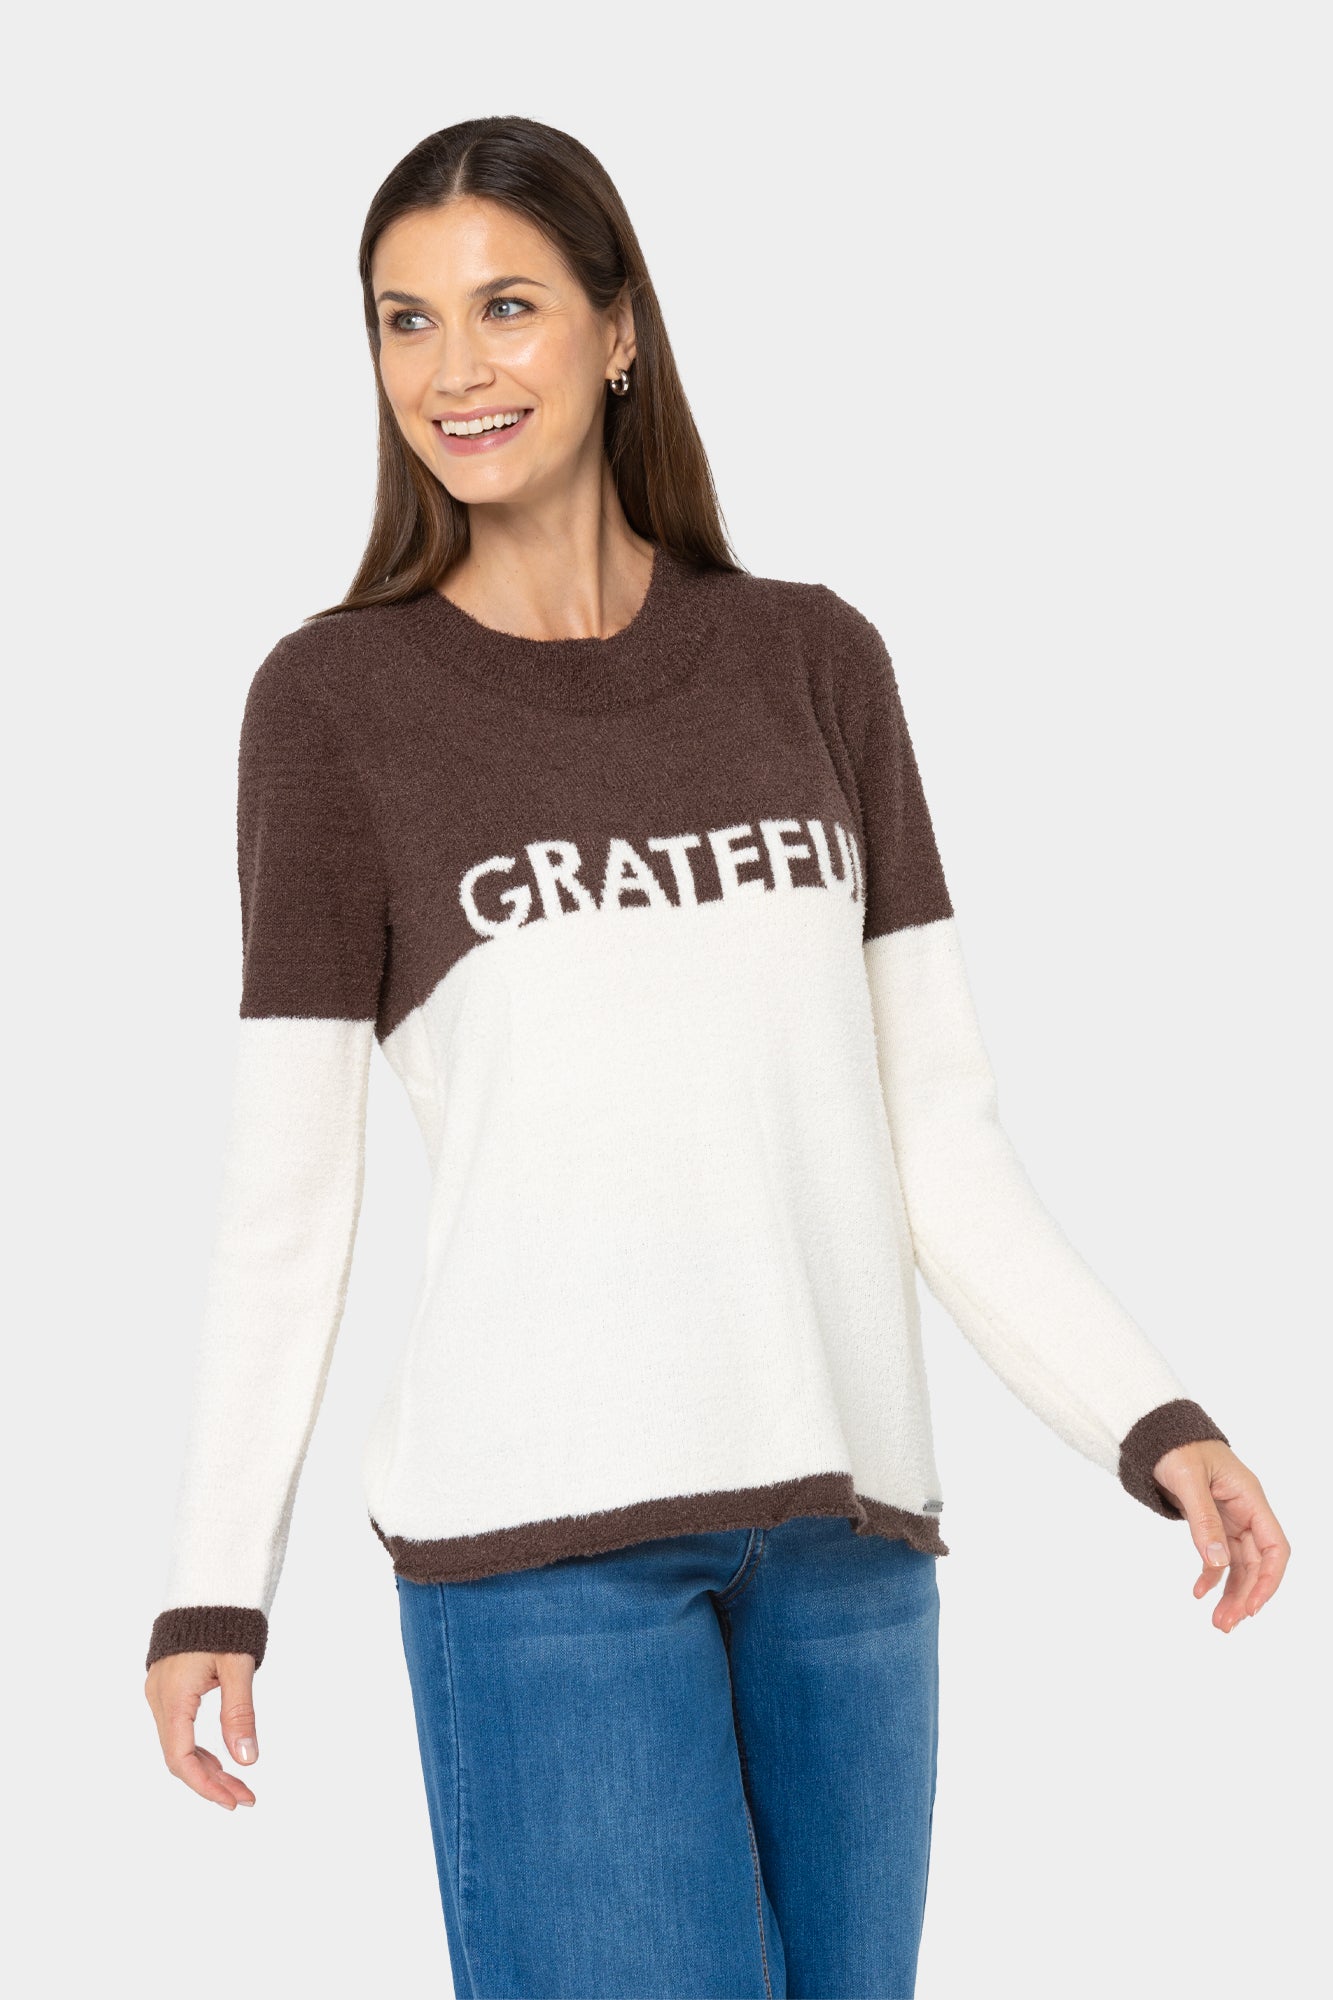 Holiday Affirmation Sweater